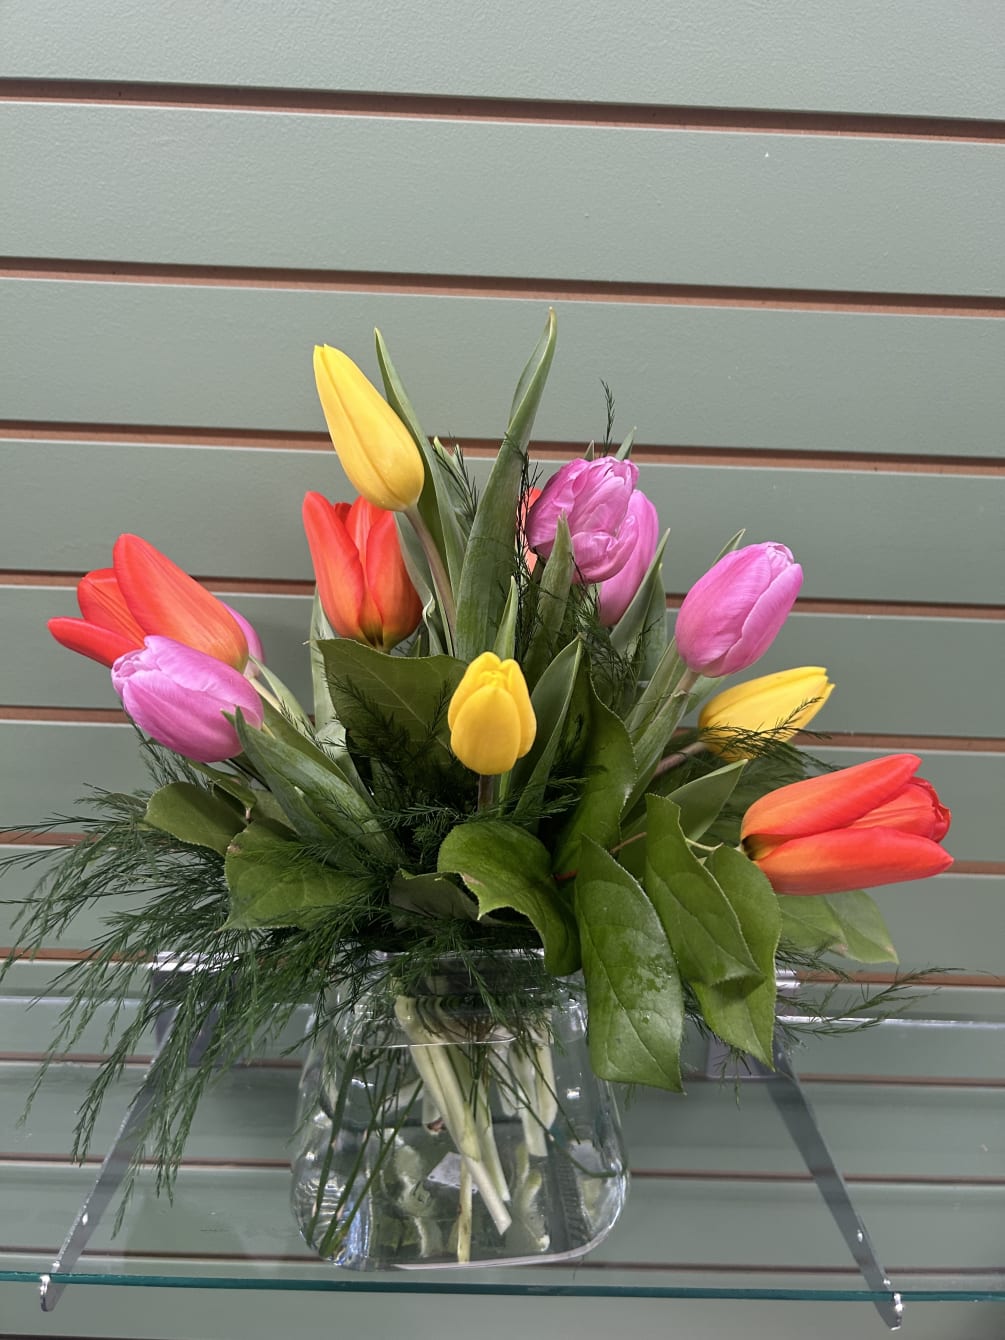 Enjoy 12 brightly colored tulips nestled in soft &amp; simple greenery in